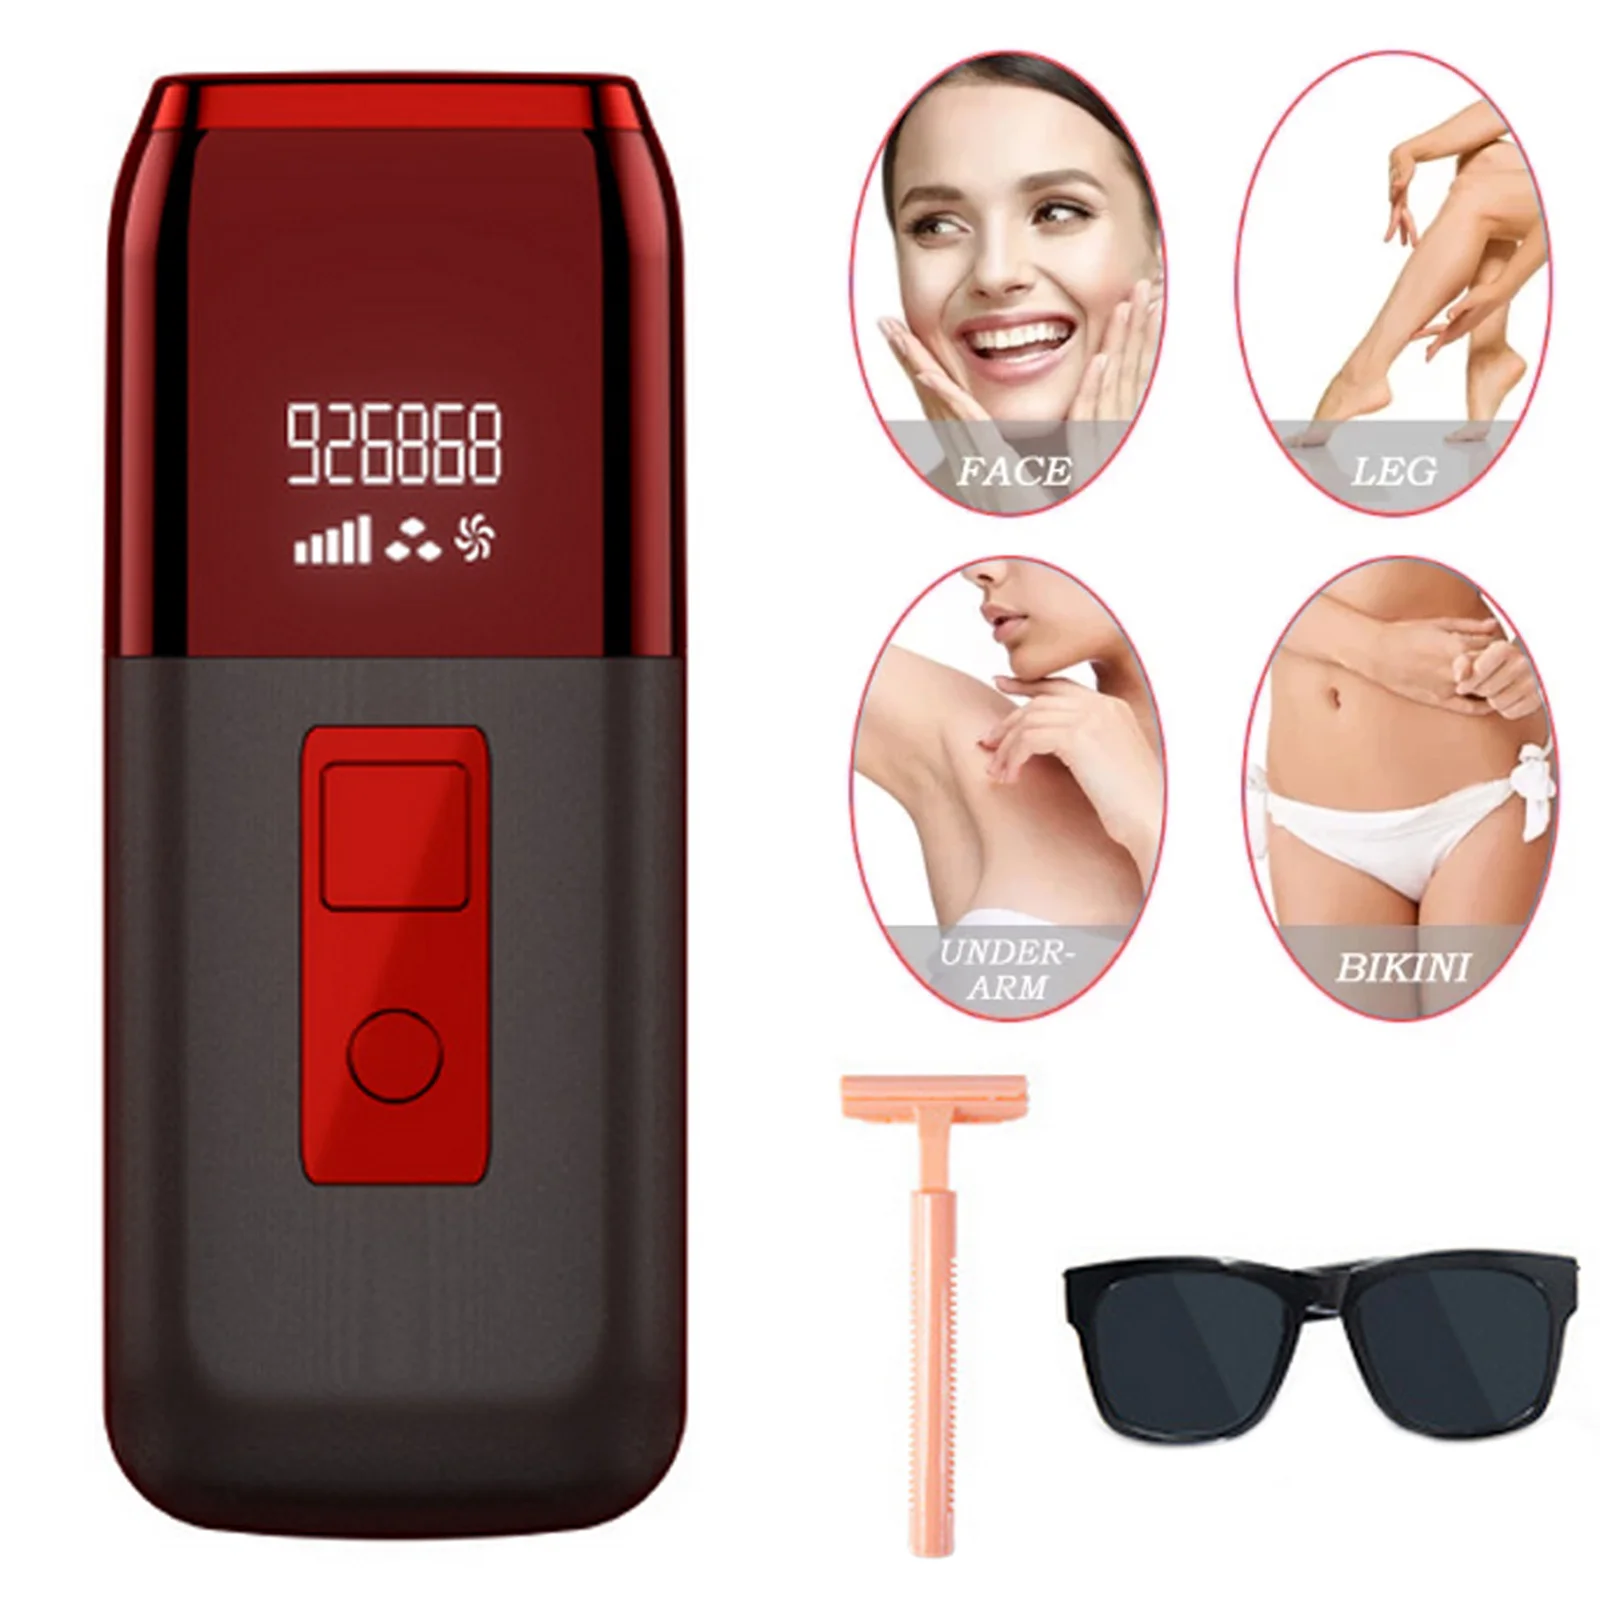 Hair Remover Portable Painless 1000000 Flashes IPL Hair Removal Device Machine with Shaver Goggles Whole Body Home Use EU Plug half open face motorcycle helmet with goggles visor scarf biker scooter touring helmet